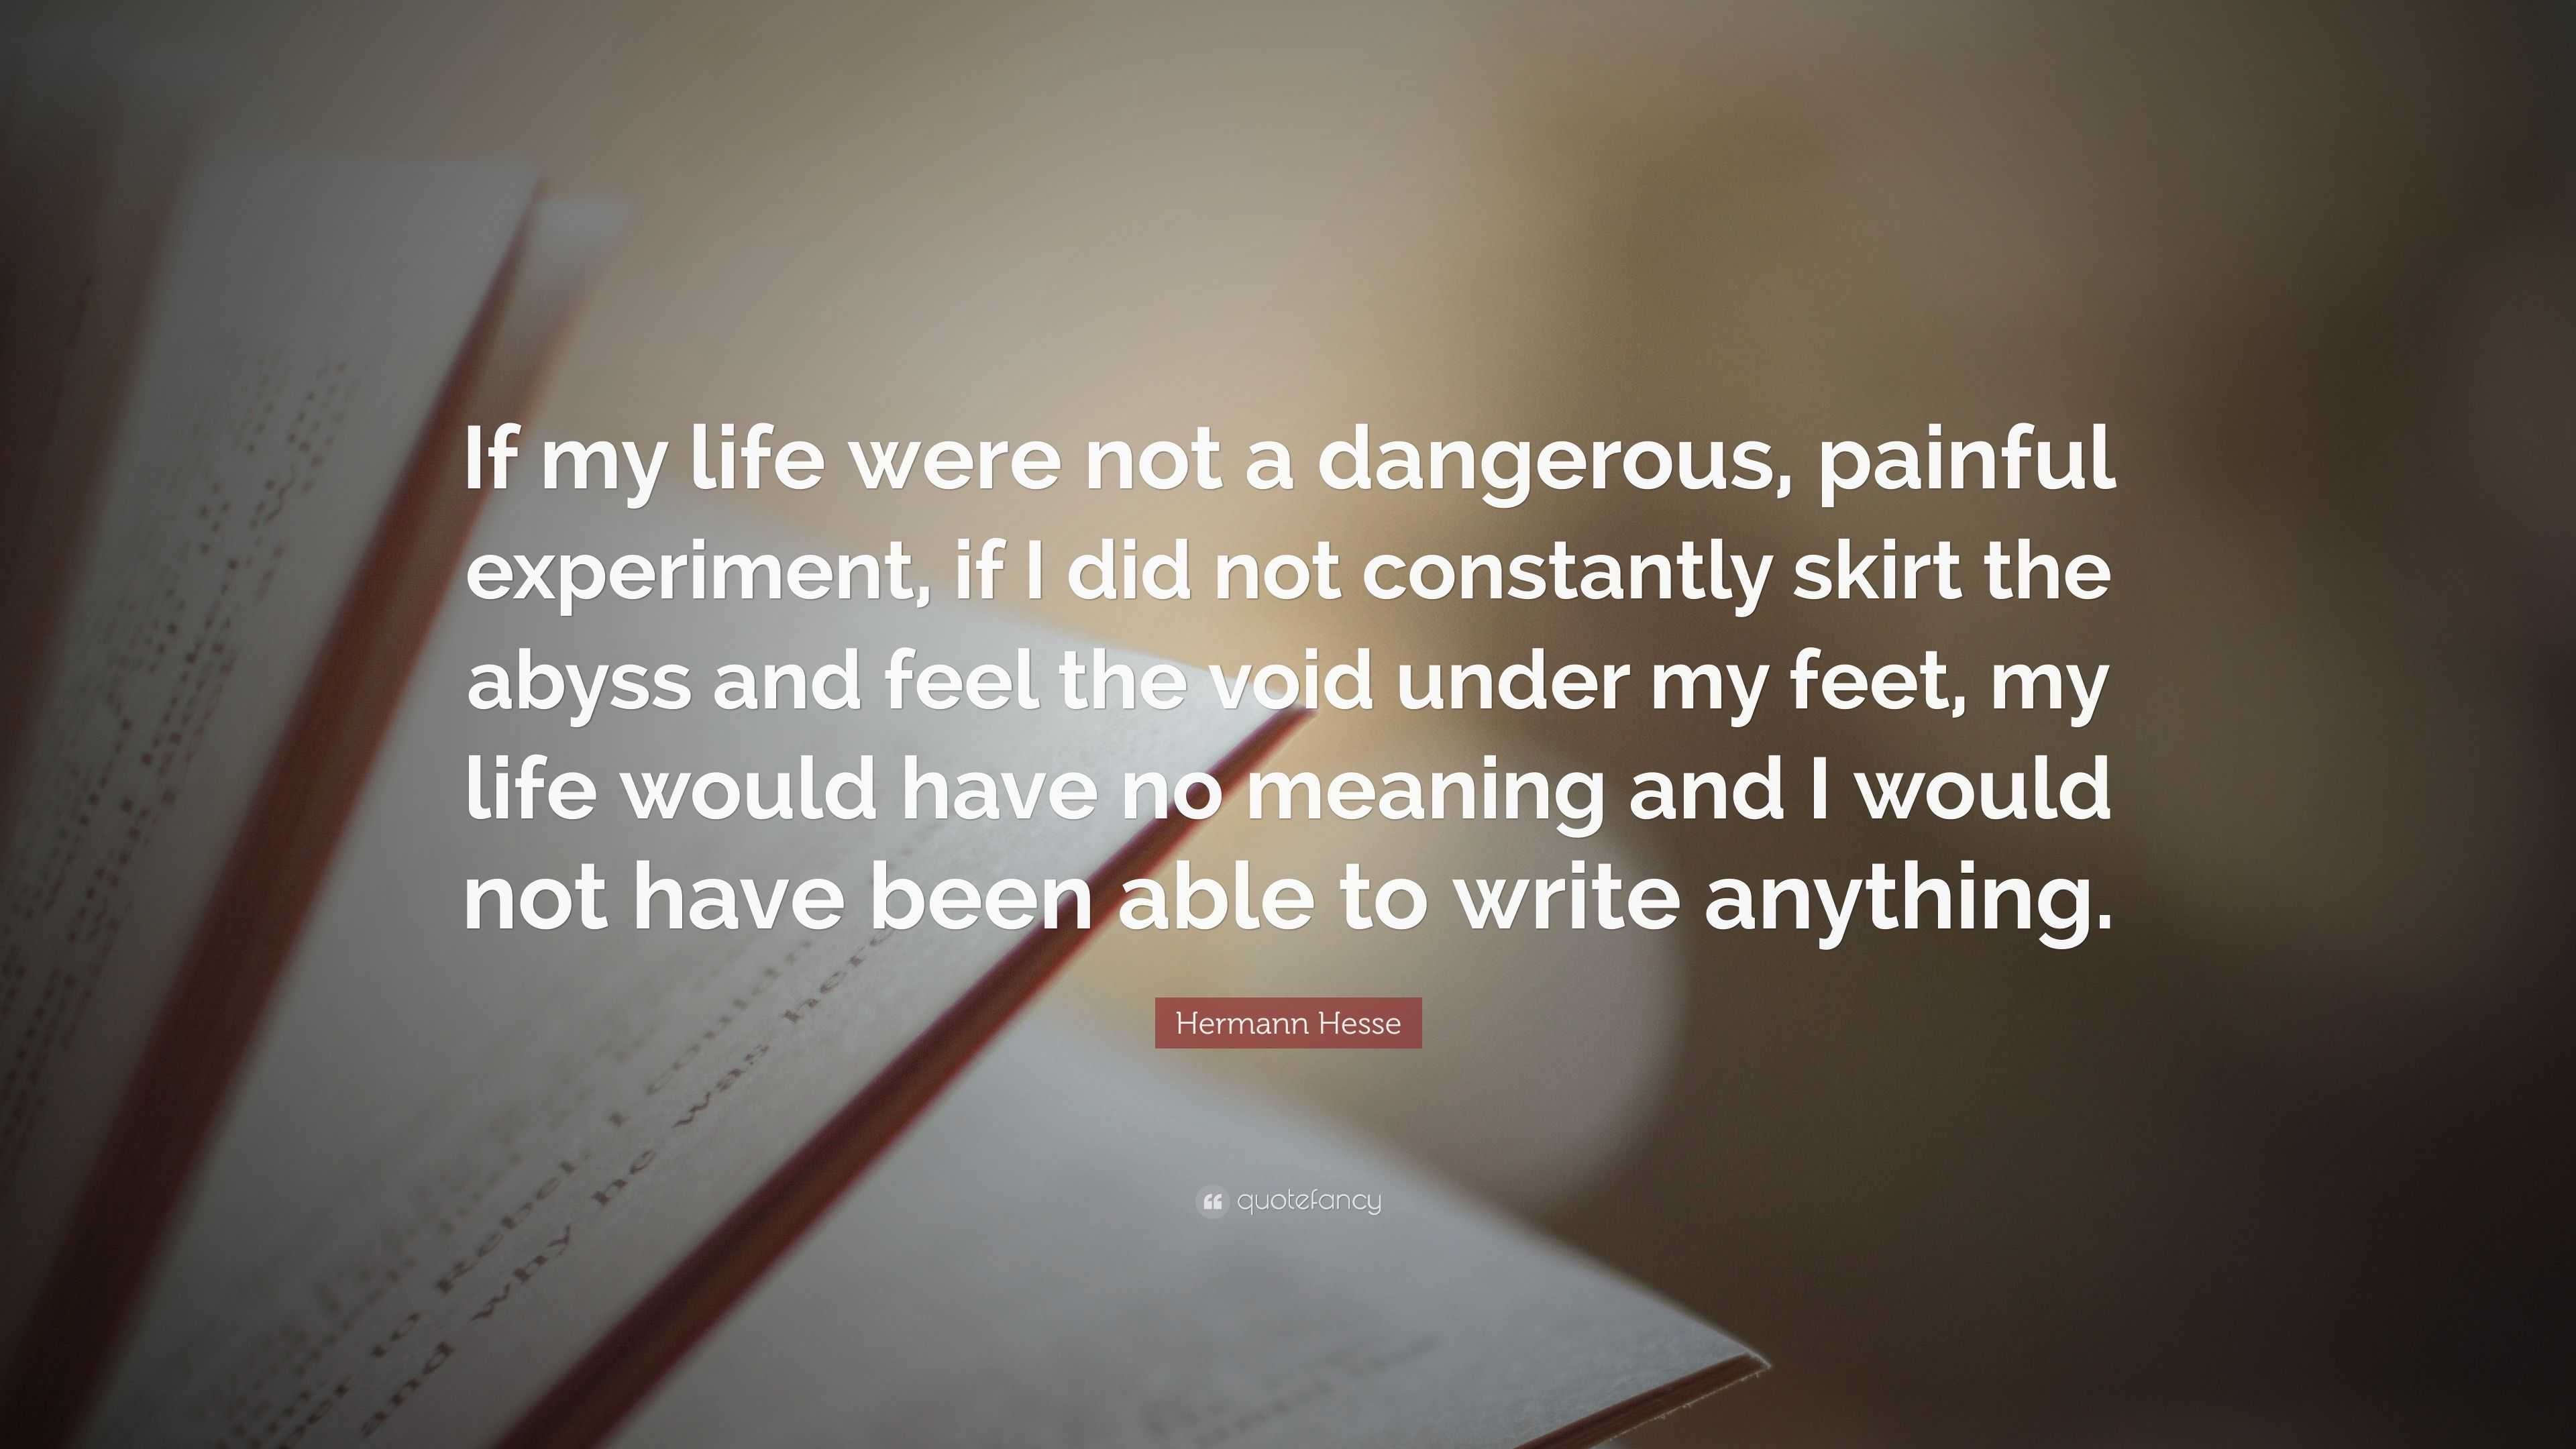 Hermann Hesse Quote “If my life were not a dangerous painful experiment